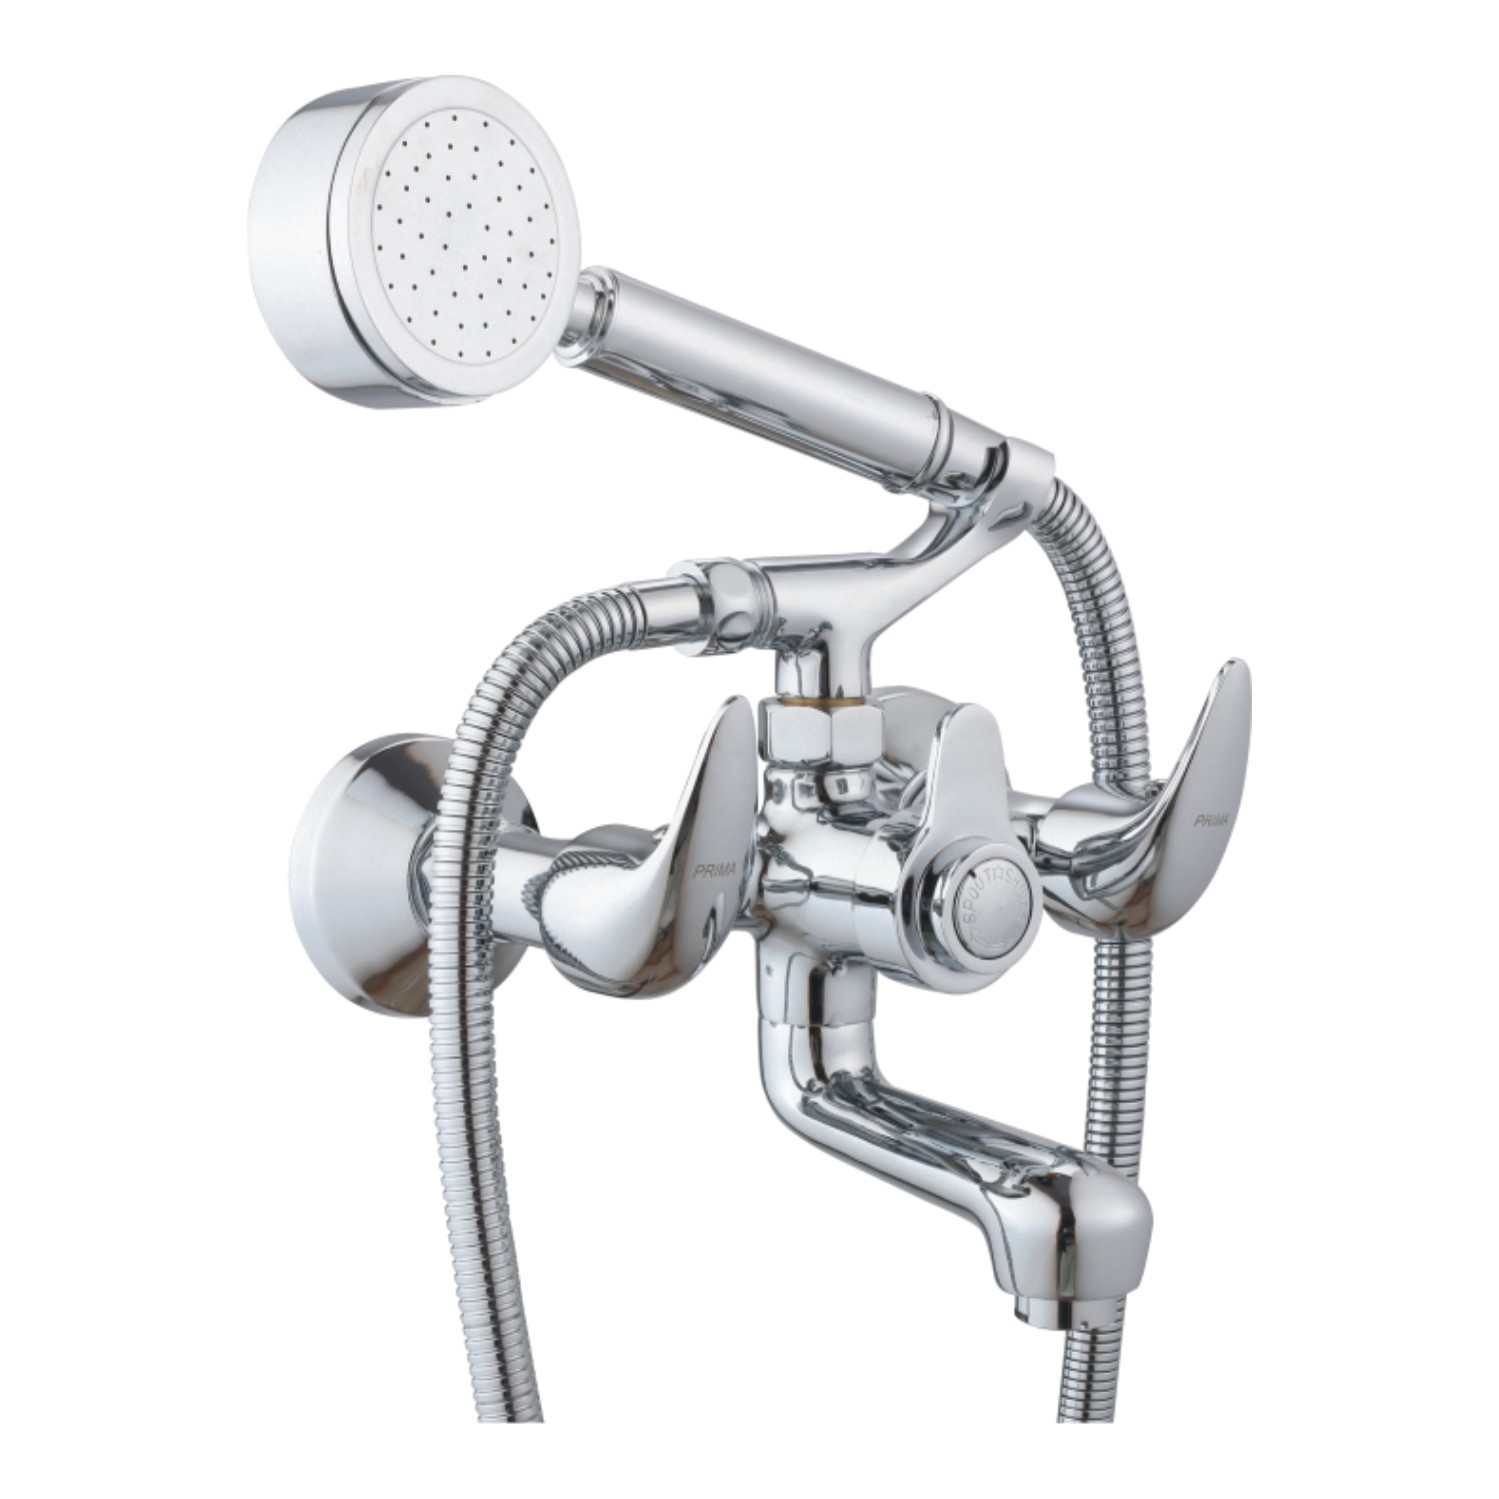 C.P WALL MIXER WITH TELEPHONIC SHOWER & FLEXIBLE 1.5 MTR. TUBE 